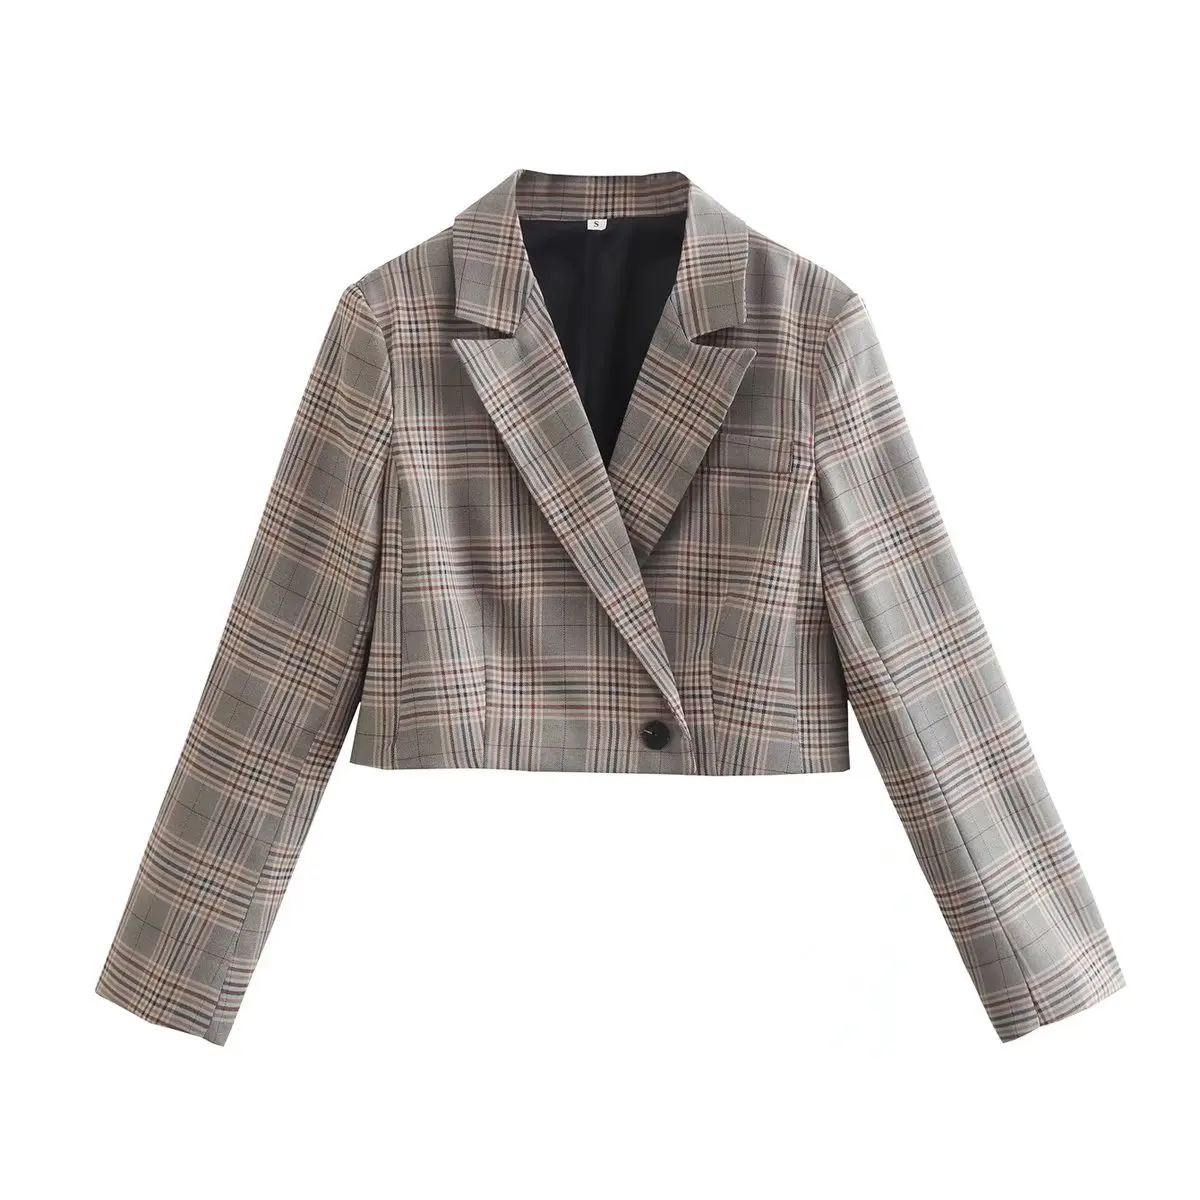 Primary image for Zevity Women Vintage Notched Collar Plaid Print Short Fitting Blazer Coat Office